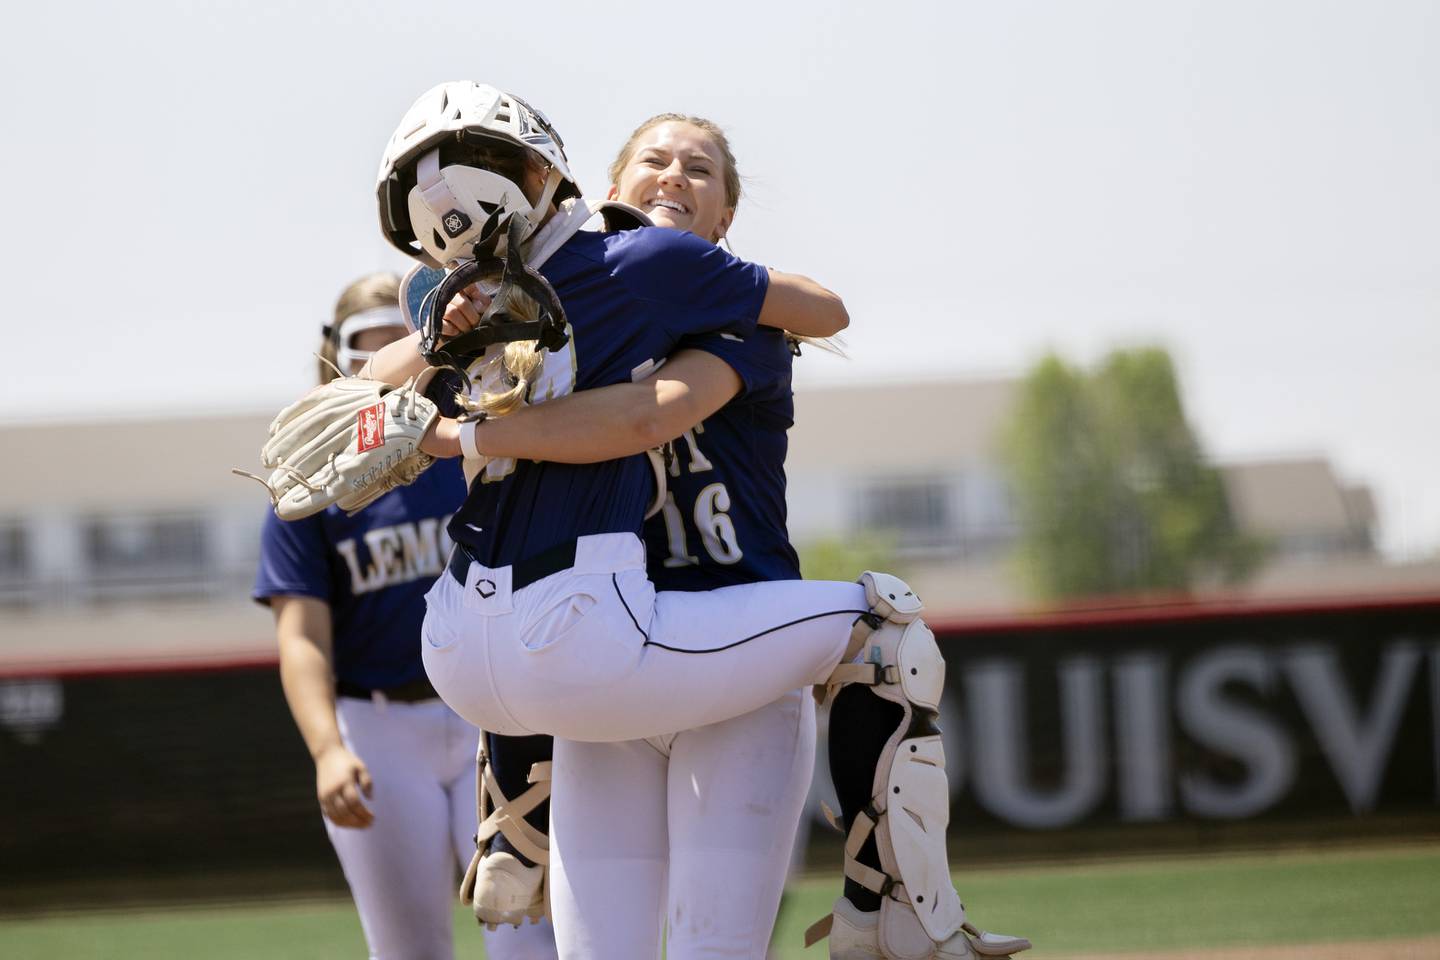 Lemont’s Sage Mardjetko hugs her catcher after winning 10-0 over Benet Academy Friday, June 9, 2023 in the class 3A state softball semifinal.